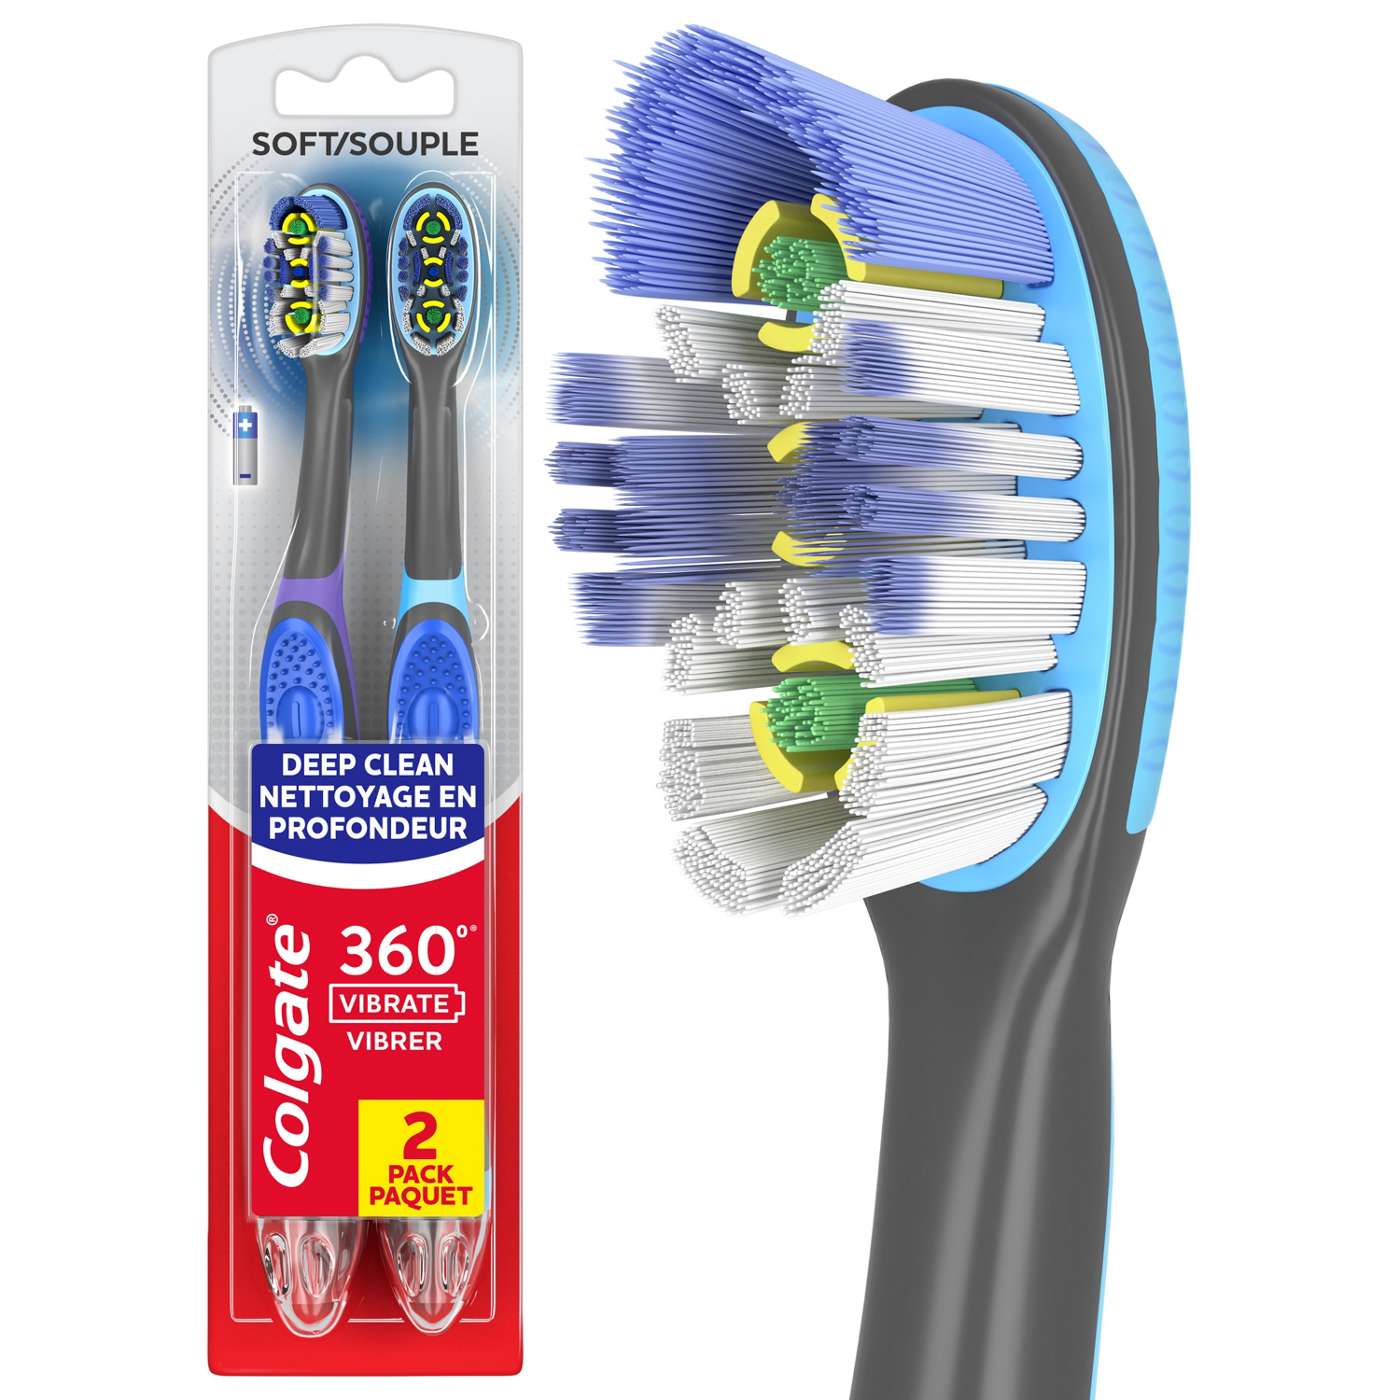 Colgate 360 Floss -Tip Sonic Powered Toothbrush - Soft; image 9 of 10